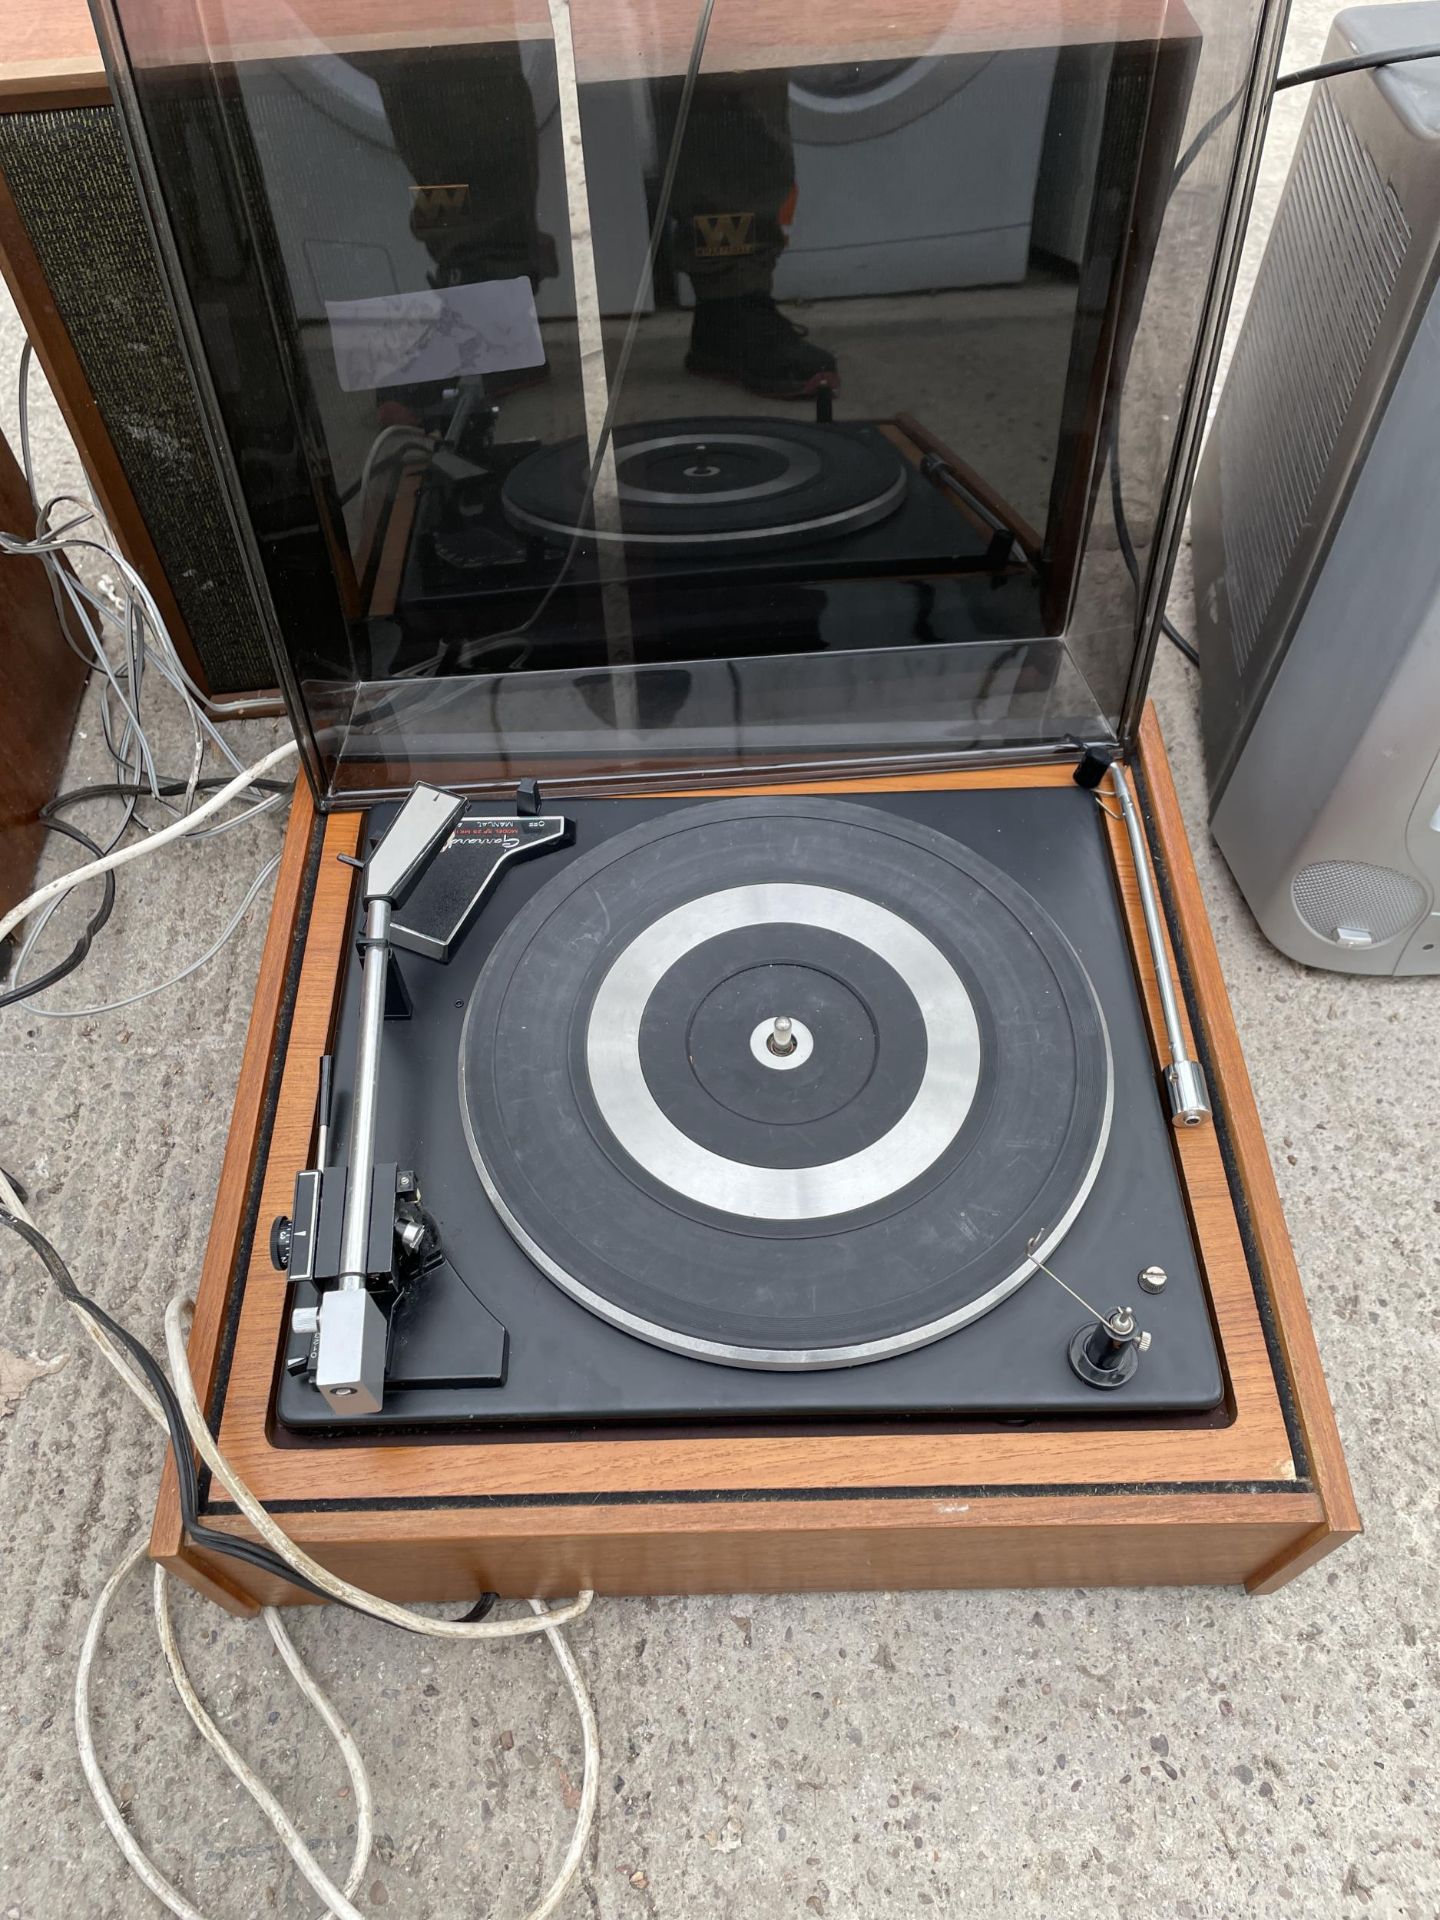 A GARRARD RECORD PLAYER WITH A PAIR OF WHARFEDALE SPEAKERS - Image 2 of 2